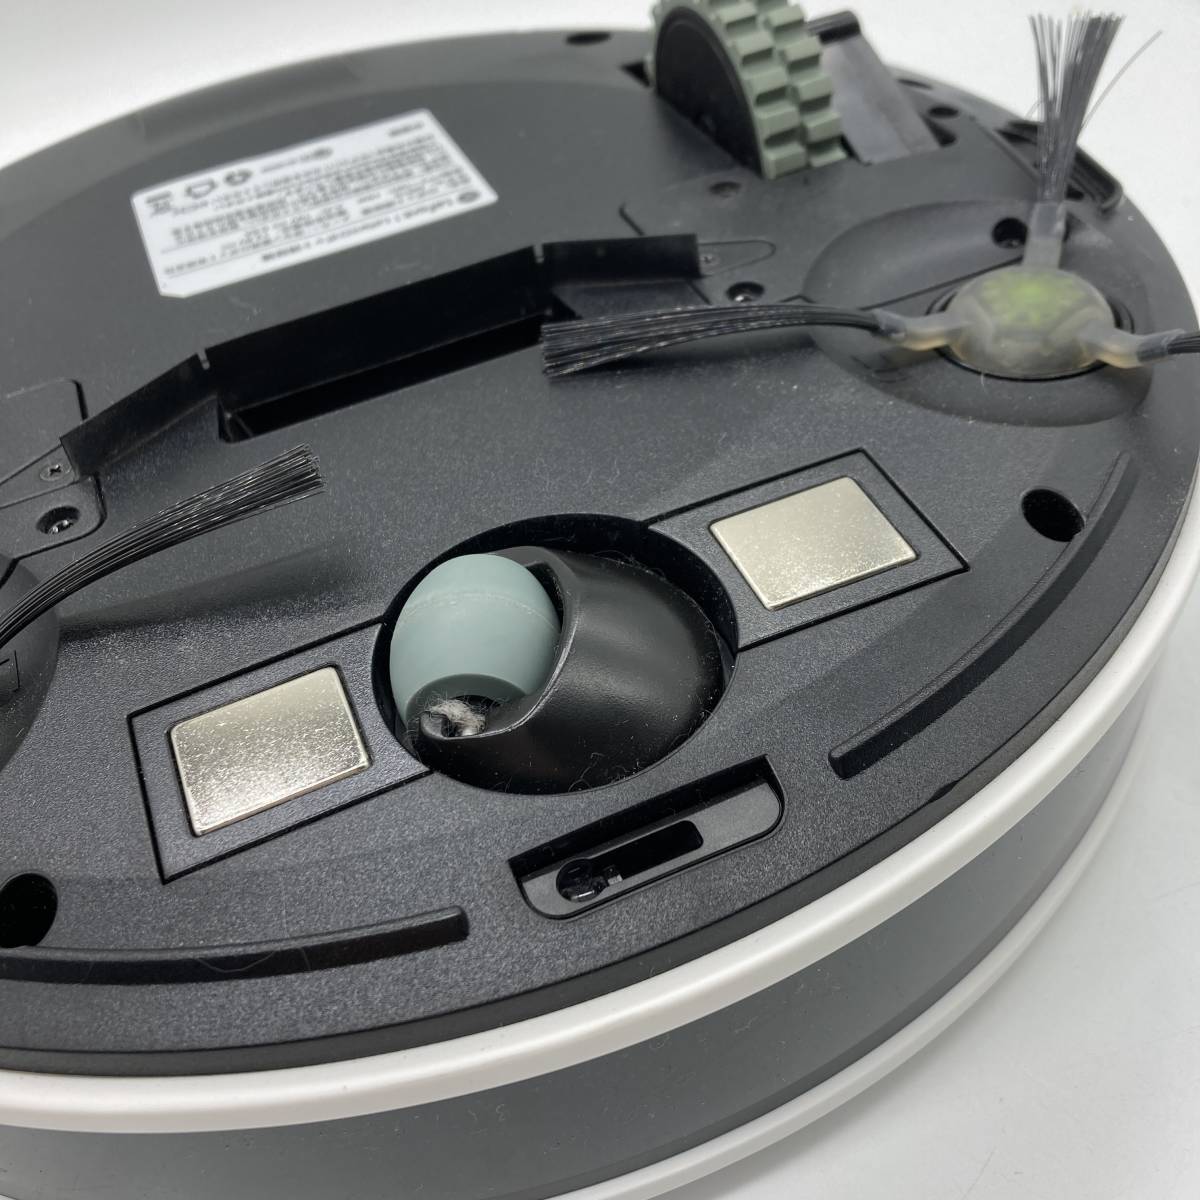 [ electrification verification settled ]Lefant robot vacuum cleaner 2200Pa powerful absorption . cleaning robot M210 /Y15481-X3